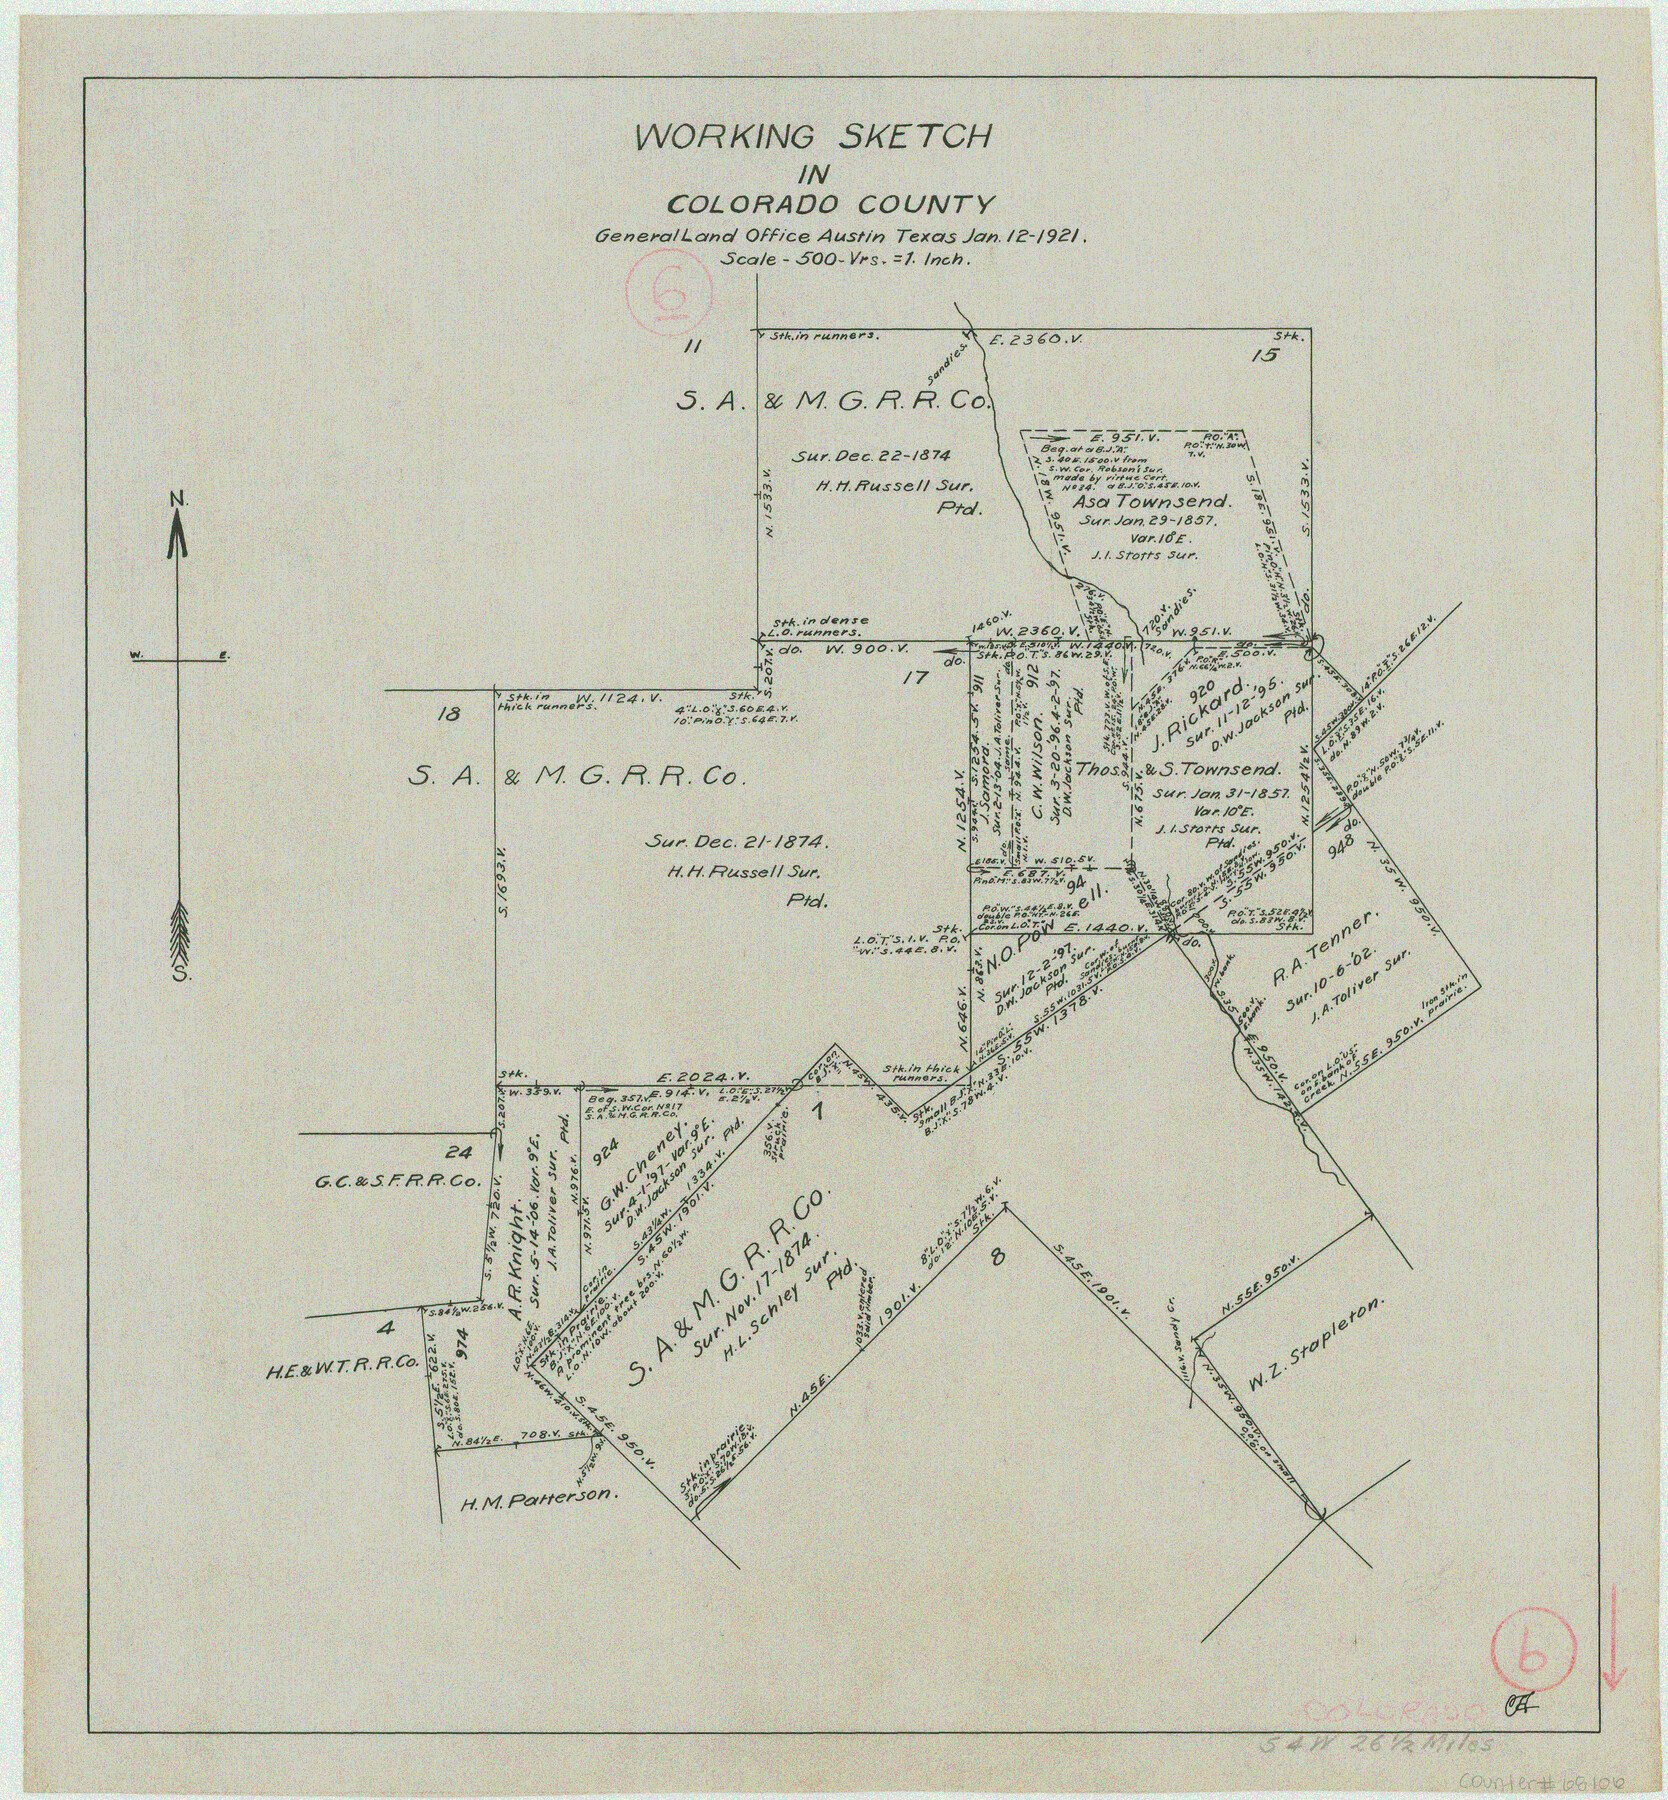 68106, Colorado County Working Sketch 6, General Map Collection